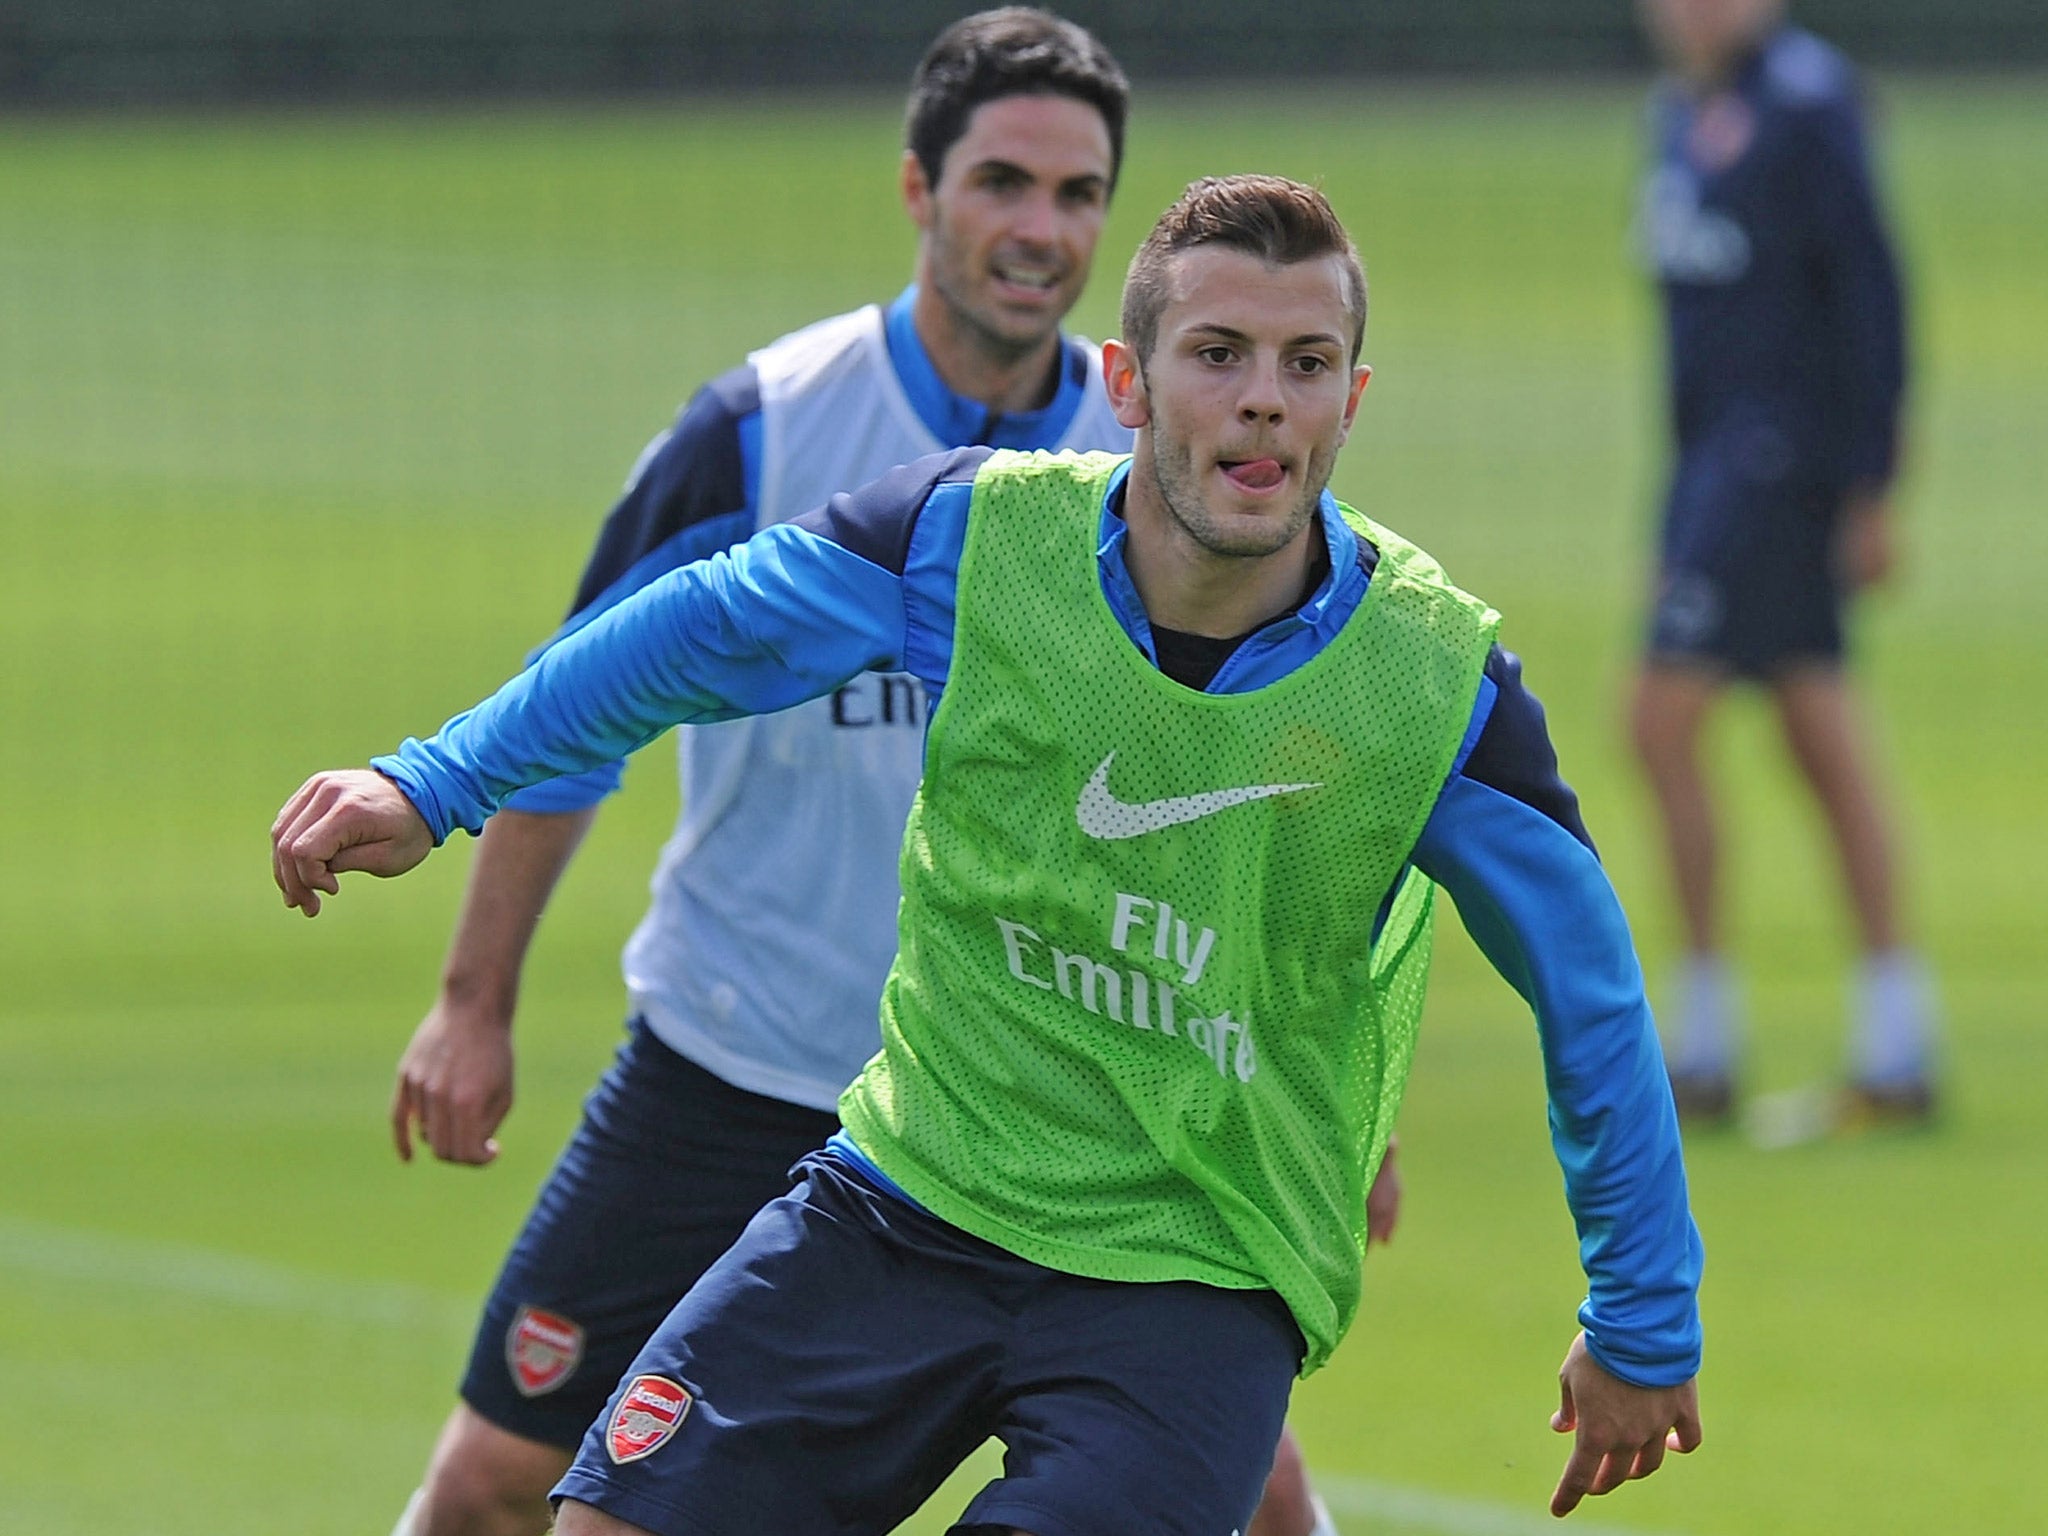 Jack Wilshere trains with his Arsenal teammates ahead of Saturday's FA Cup final